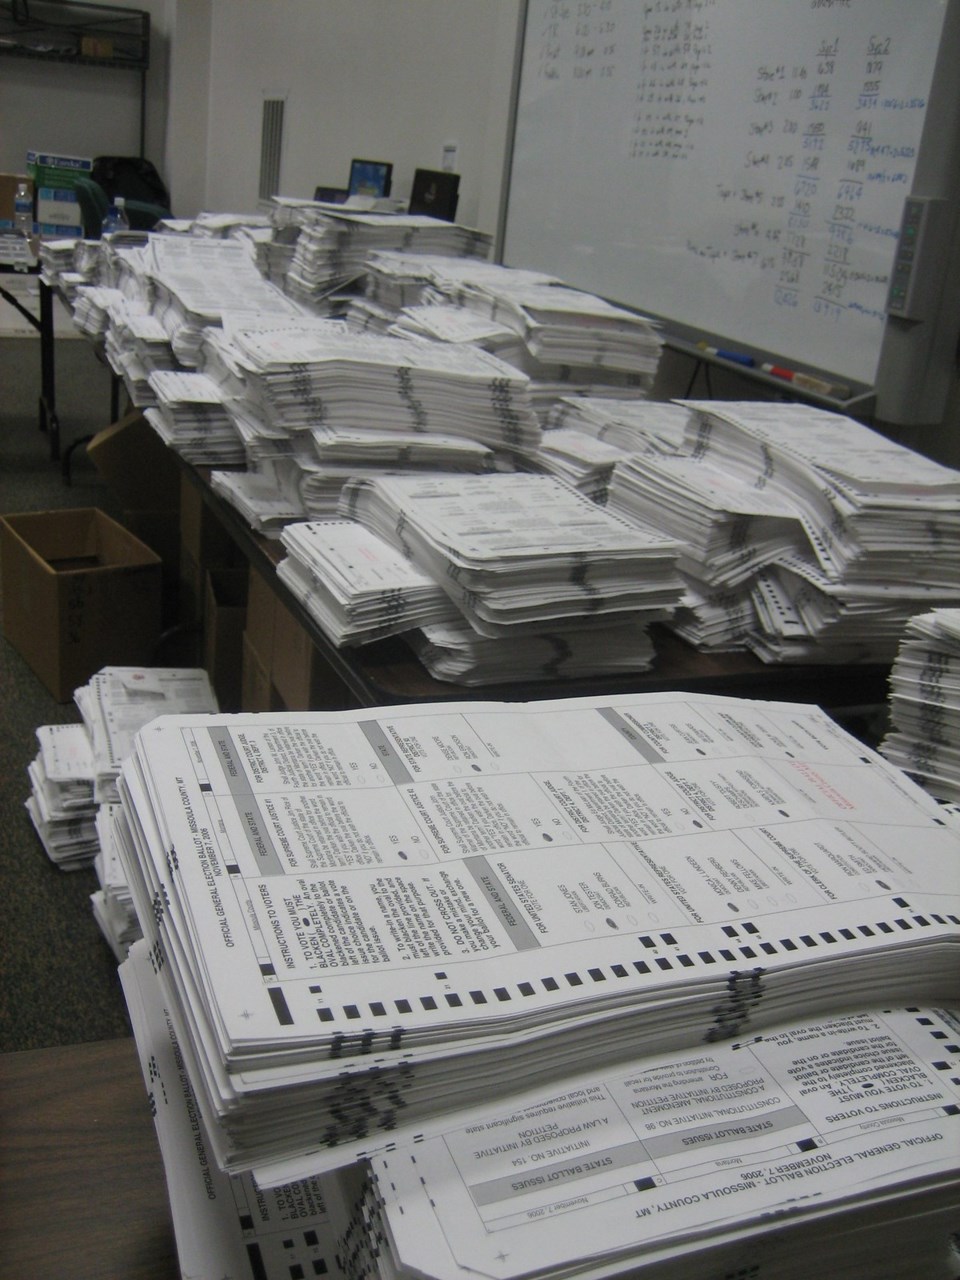 Stacks of absentee voting ballots.